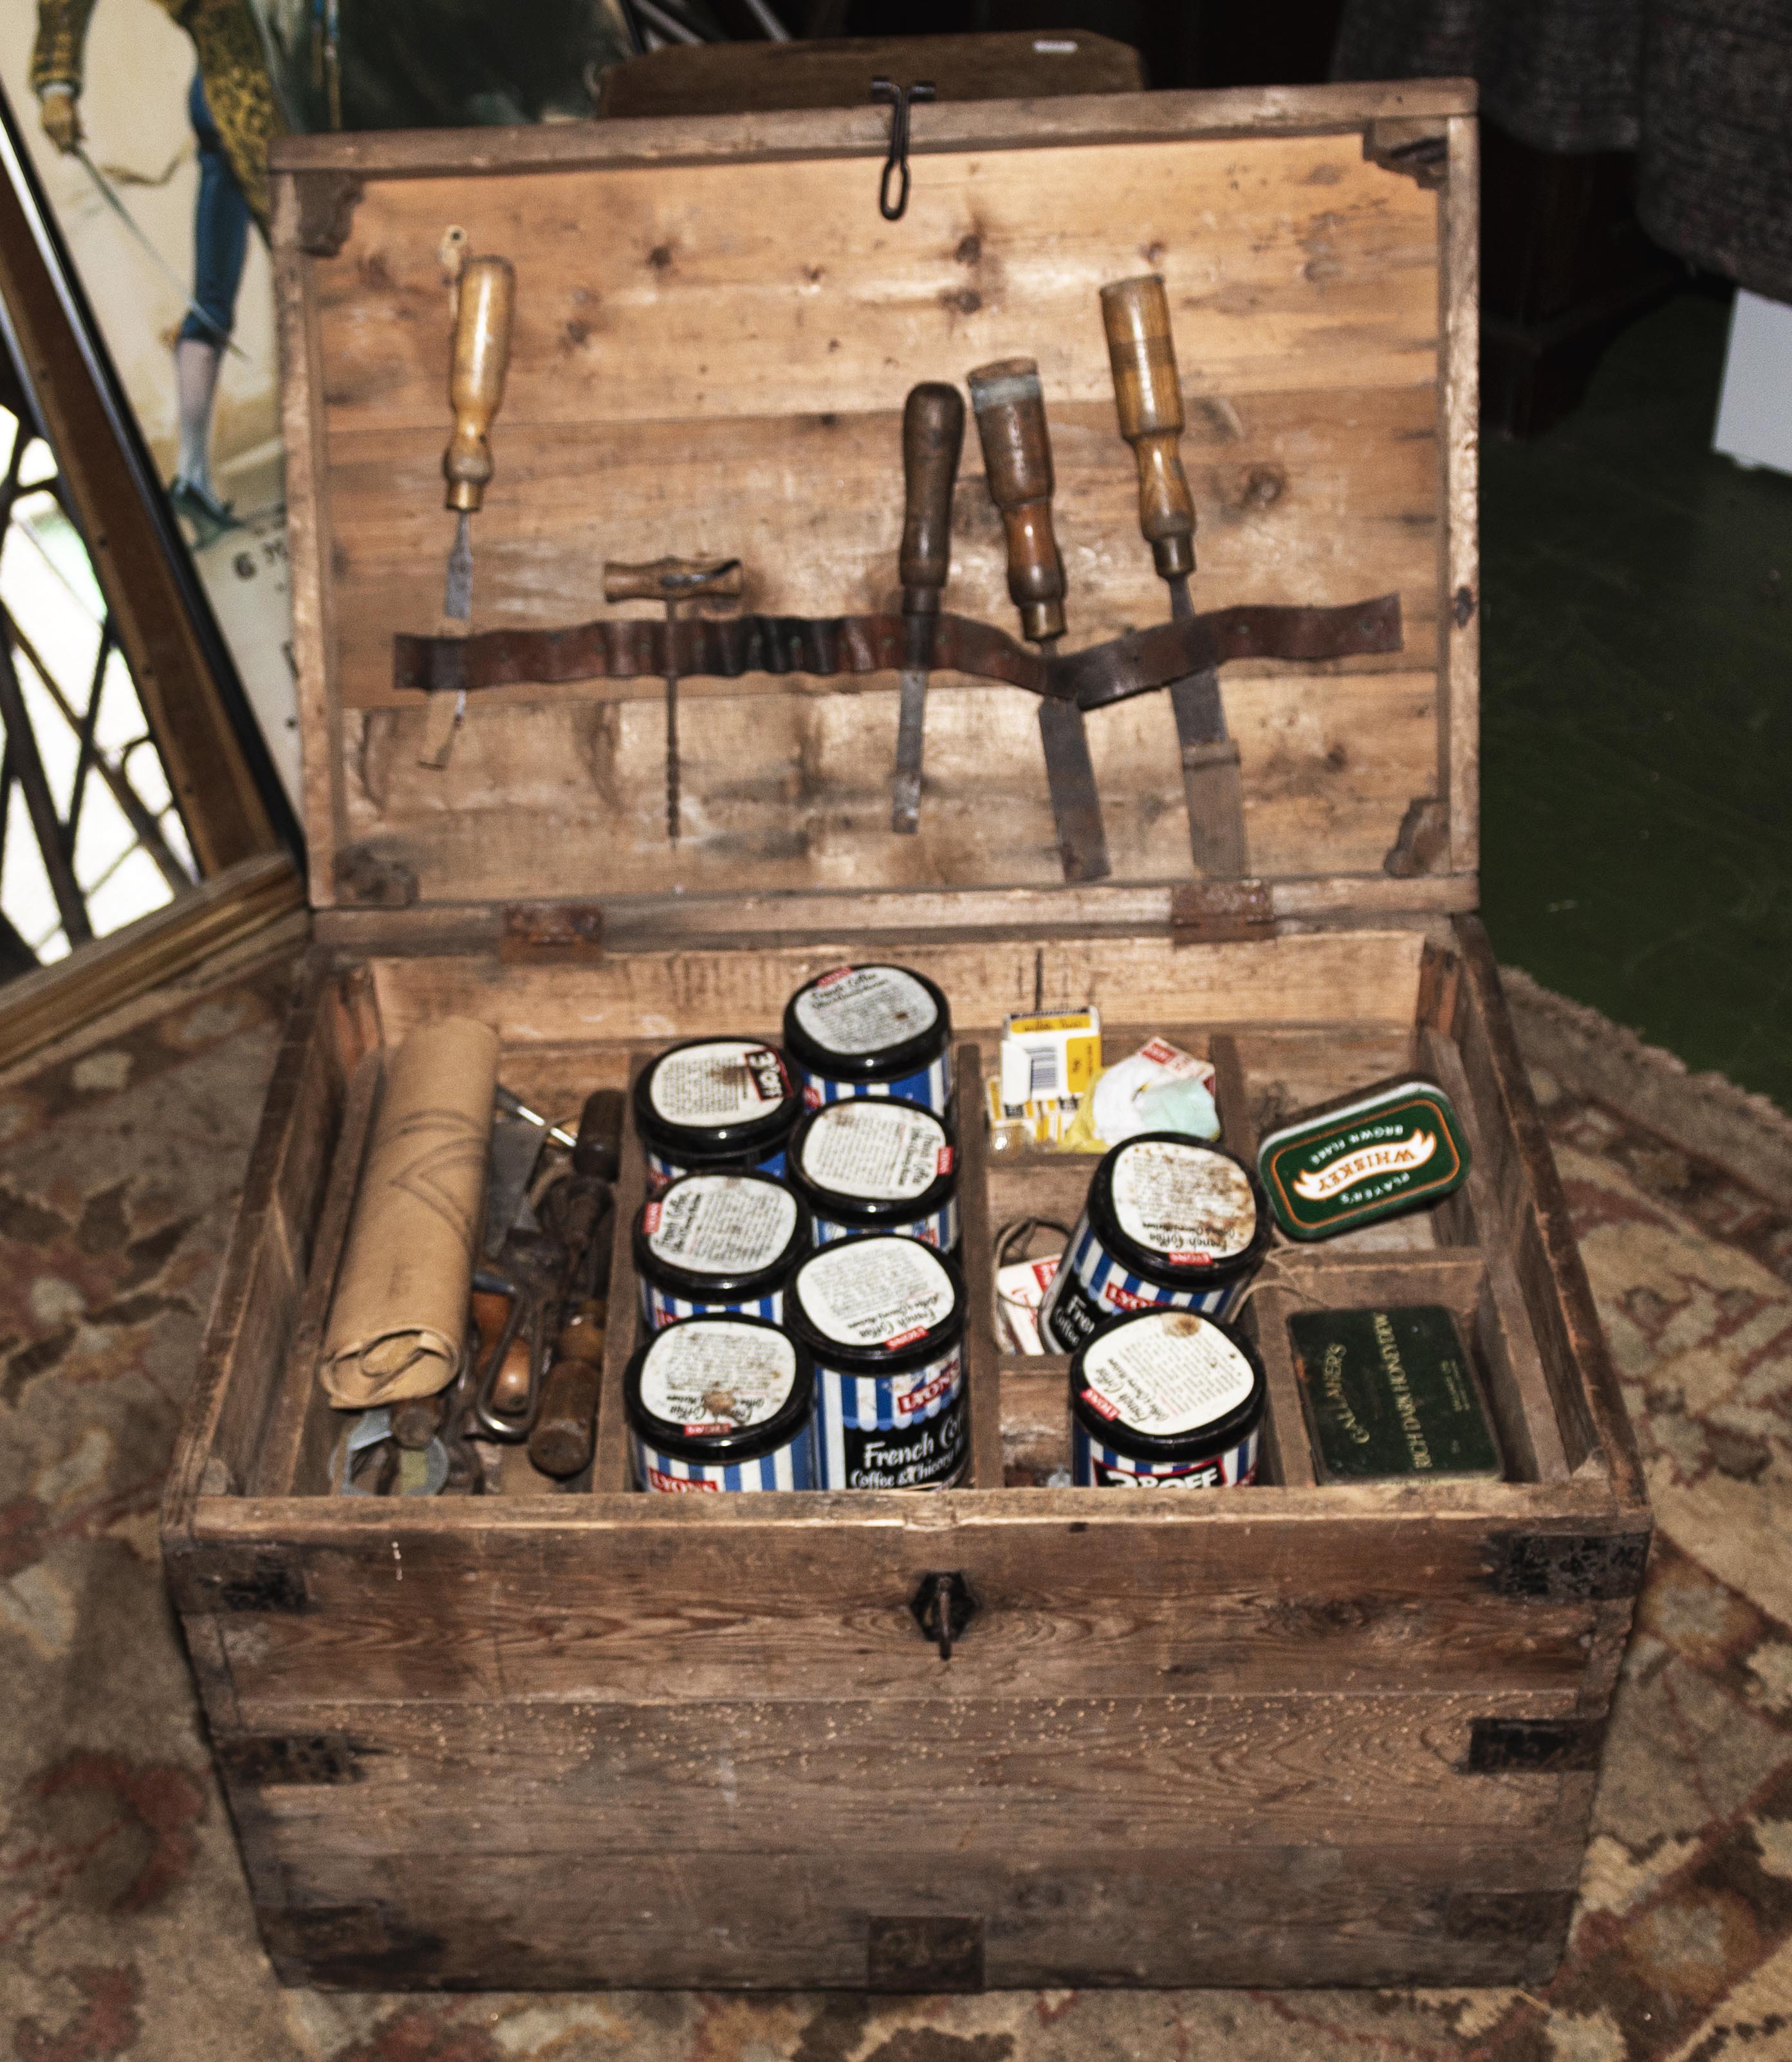 A pine box with various vintage tools